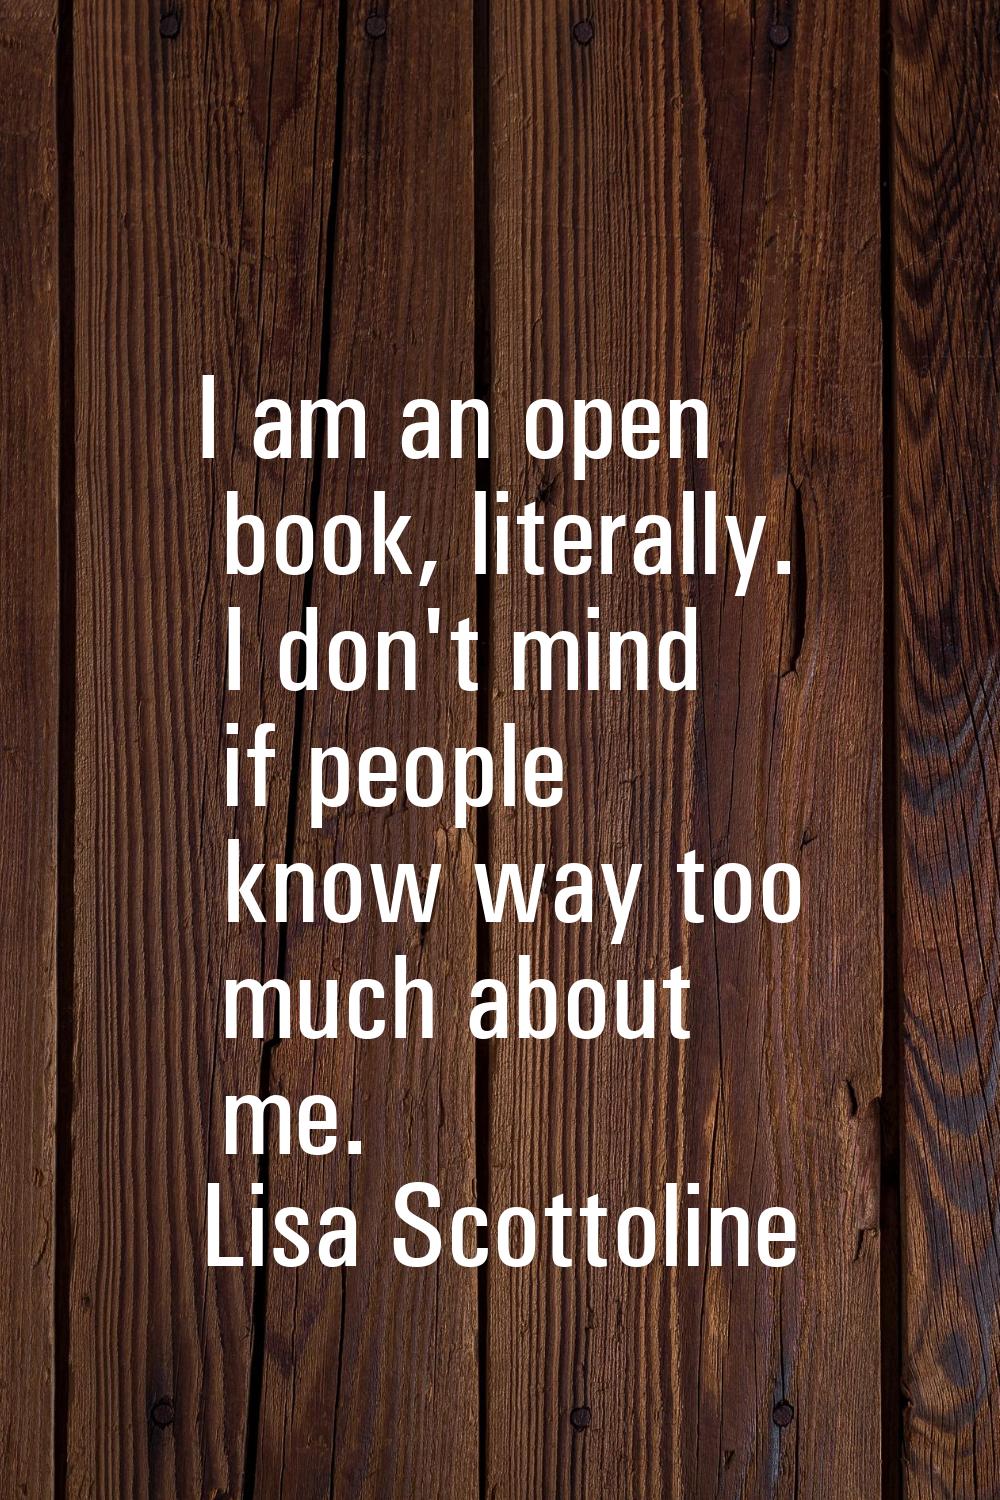 I am an open book, literally. I don't mind if people know way too much about me.